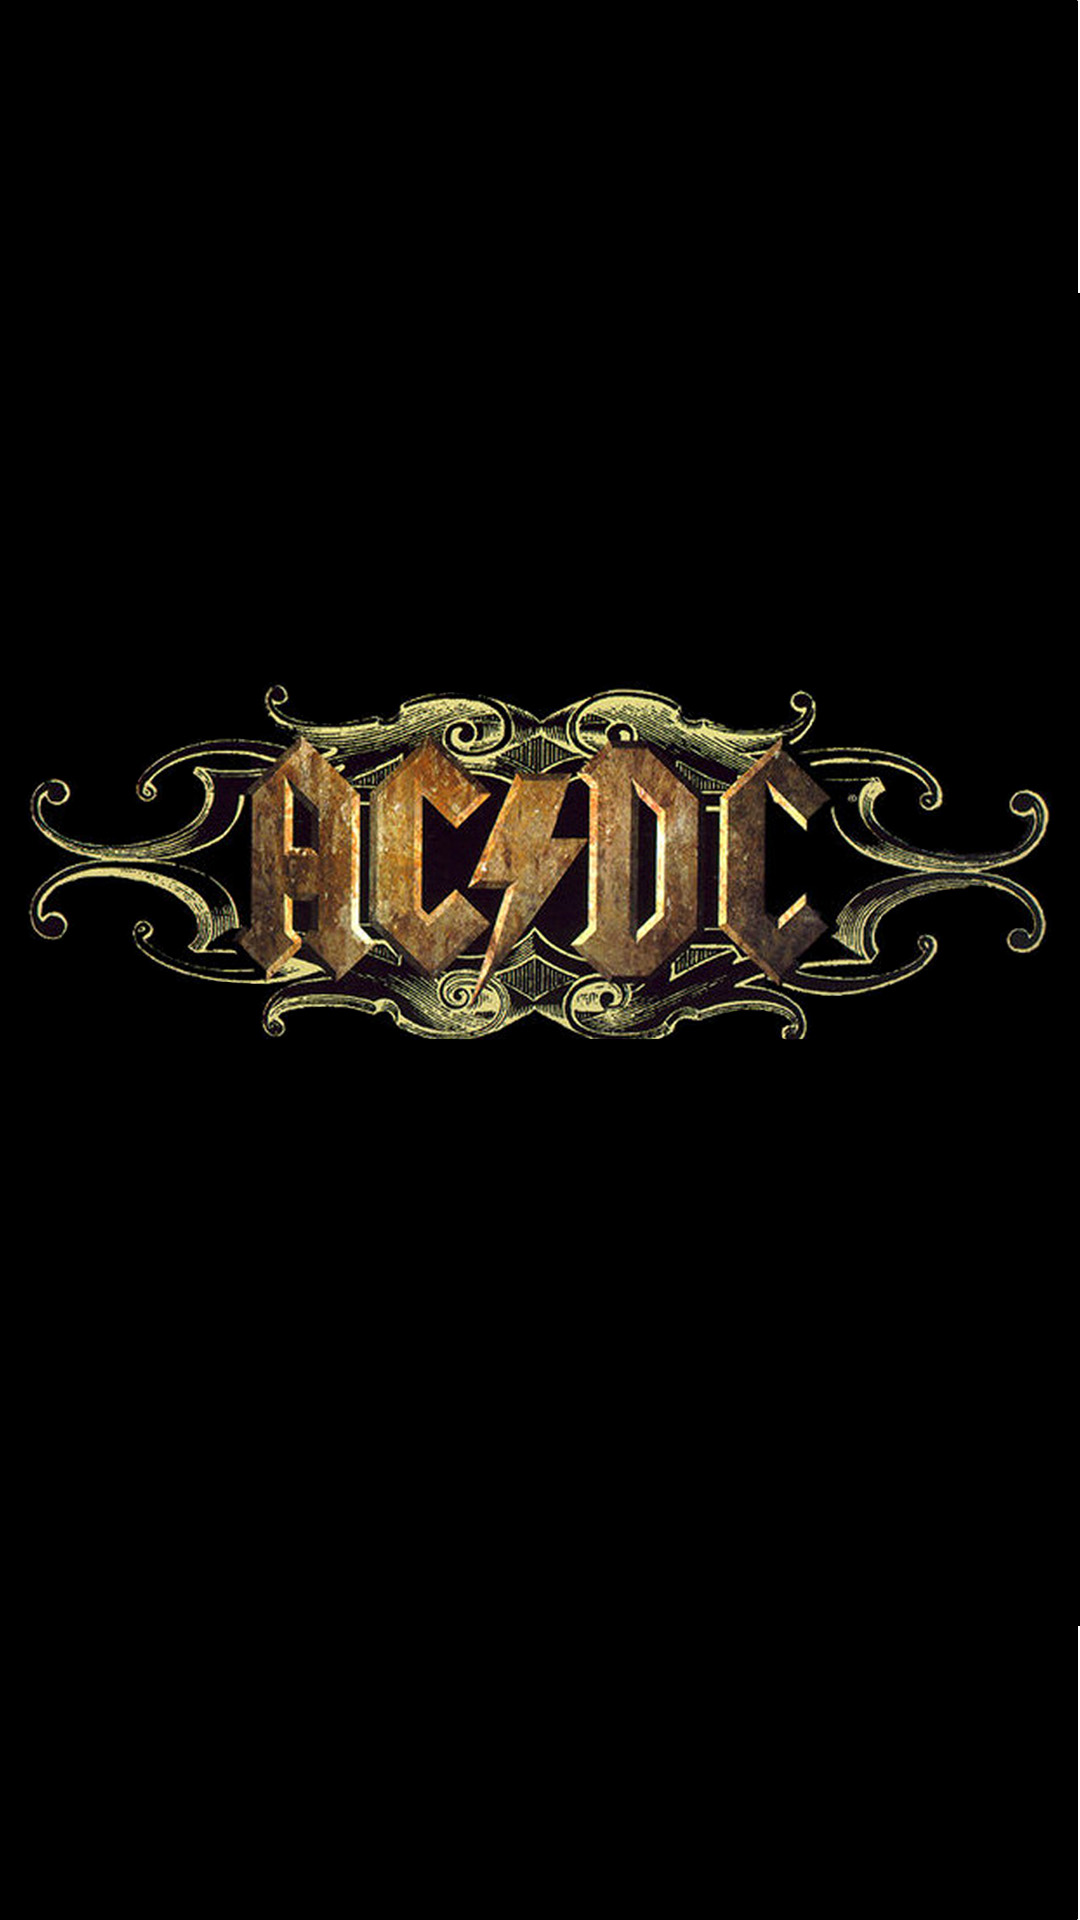 ACDC Band Logo Android Wallpaper free download